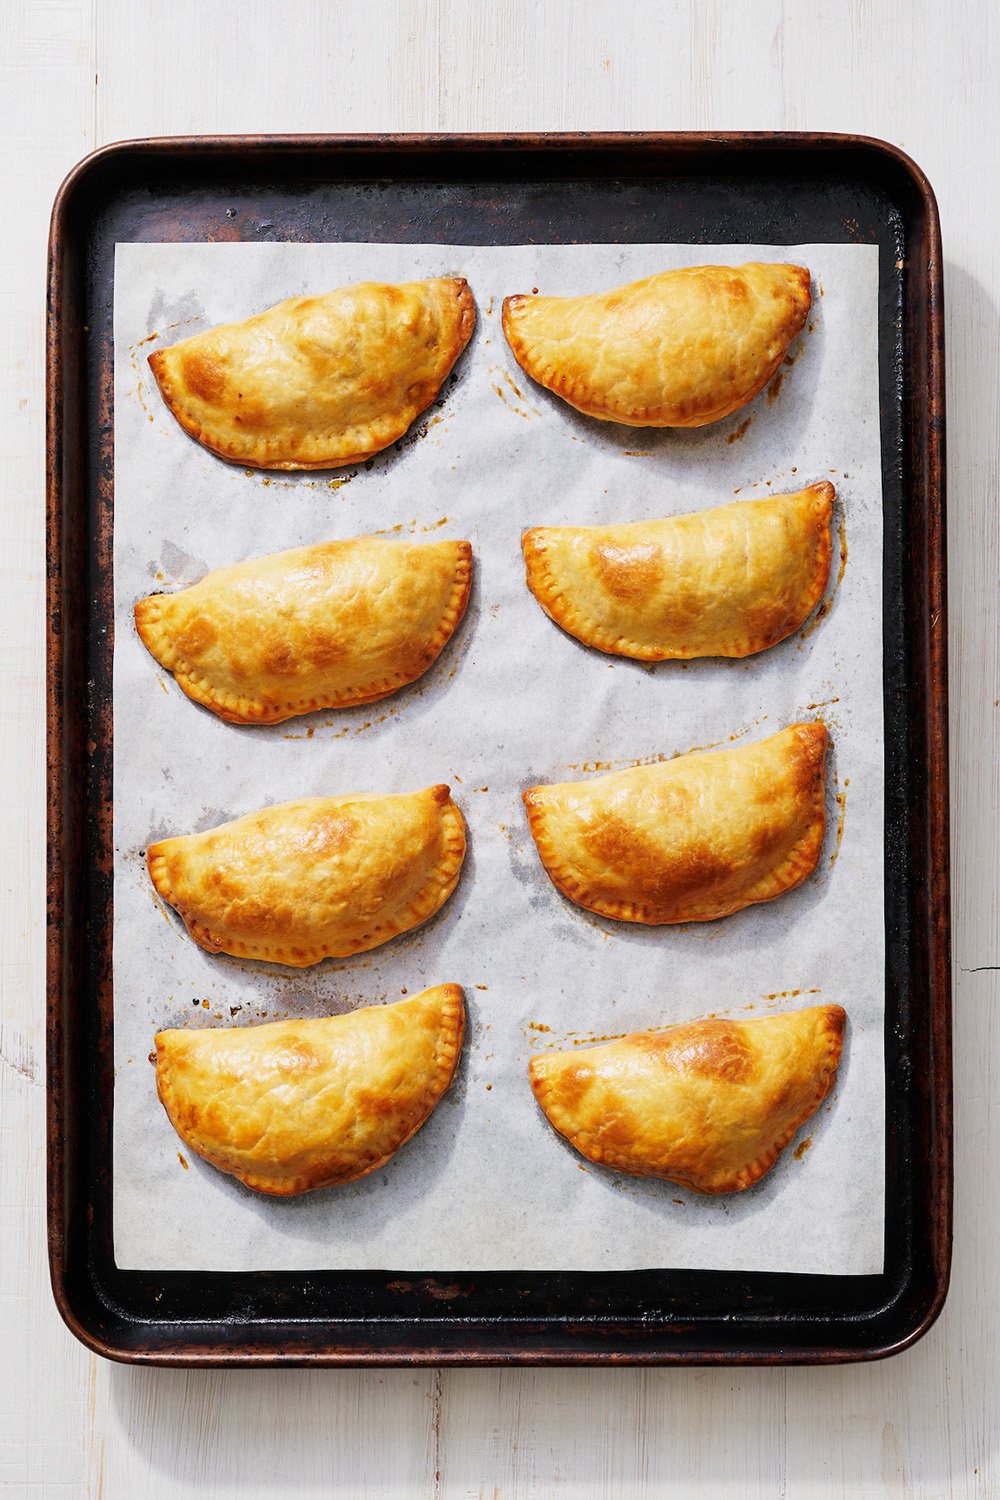 baked empanadas on a rimmed baking sheet, fresh out of the oven